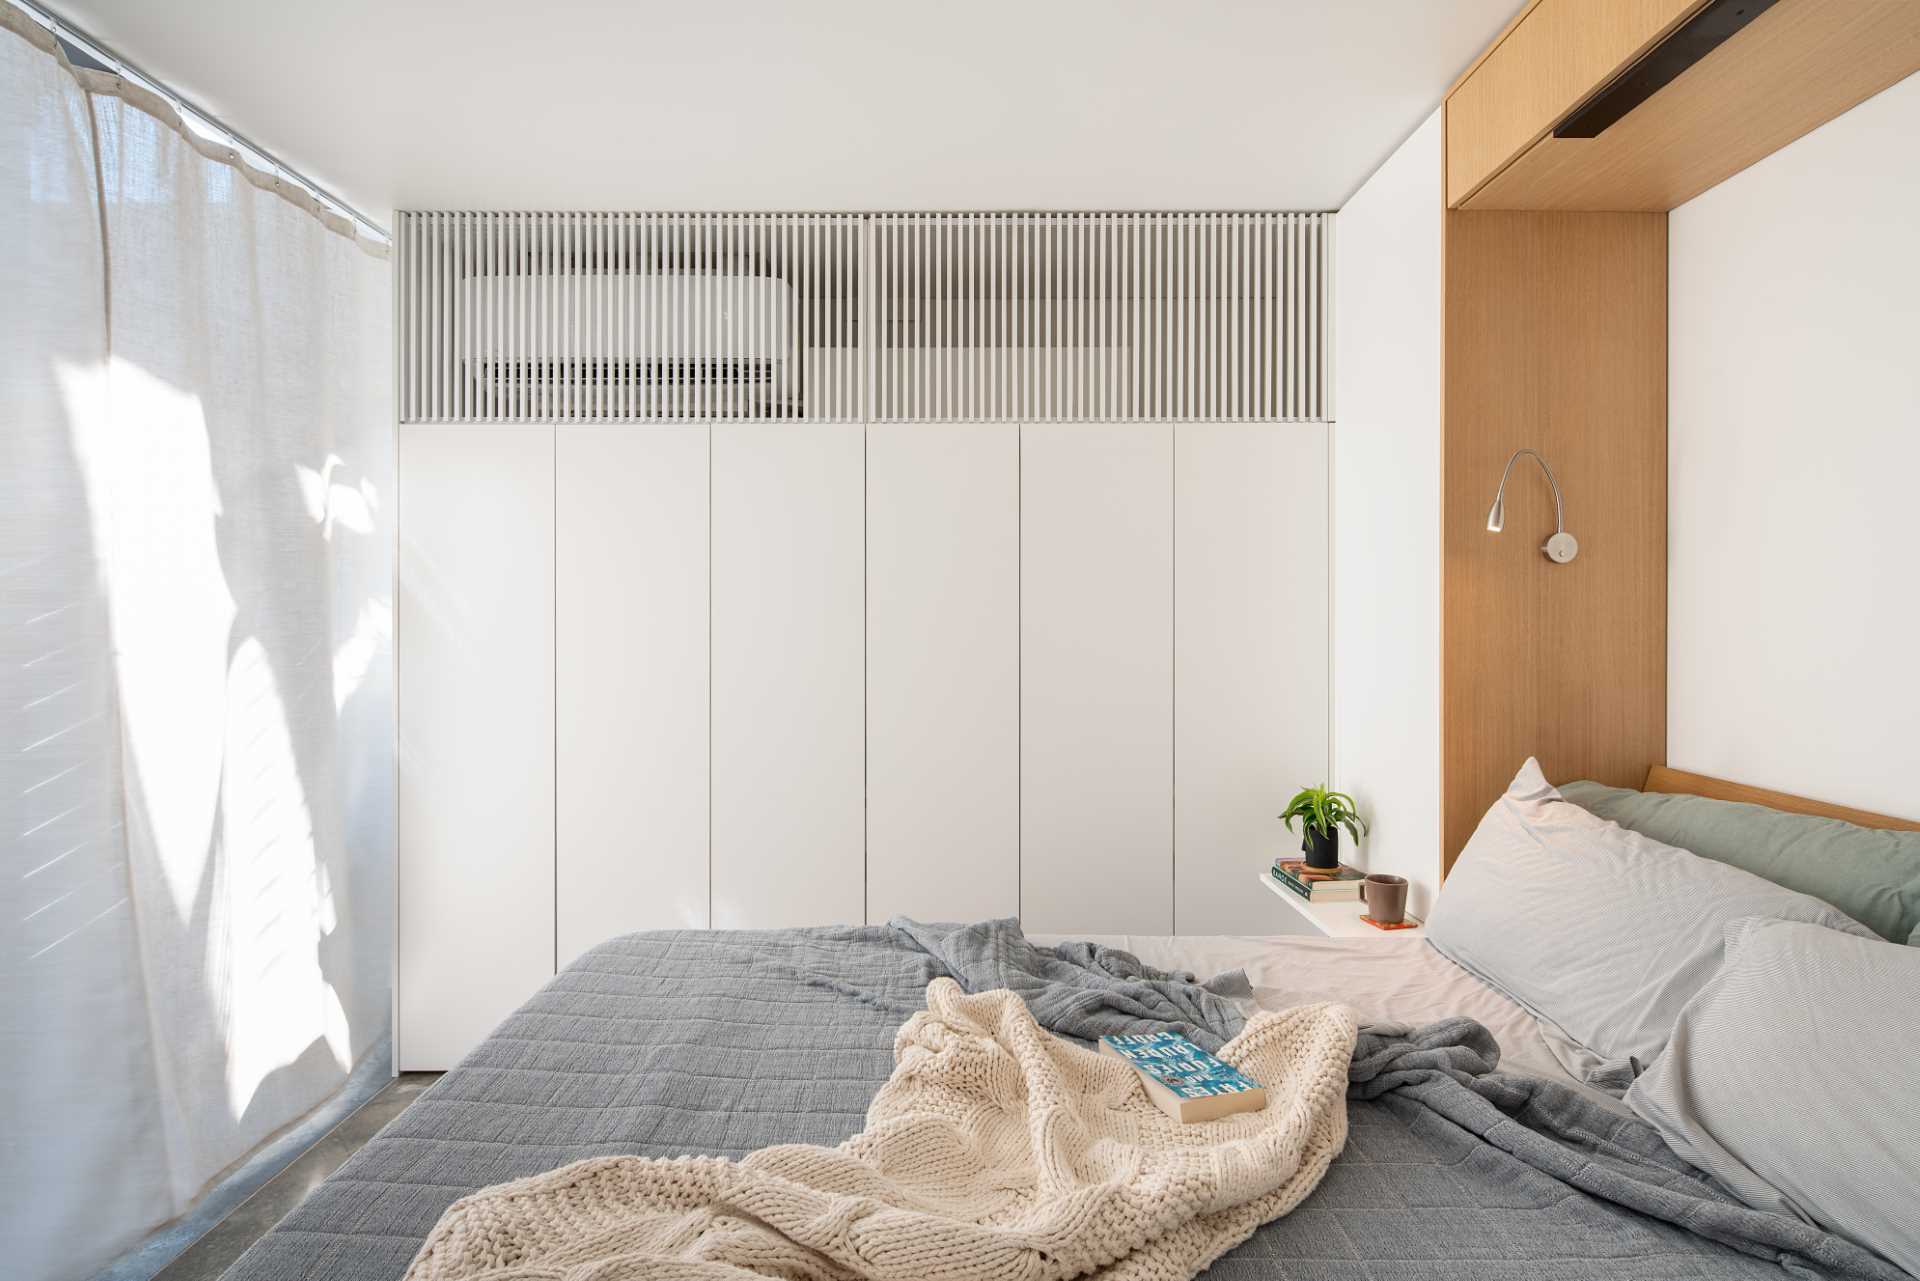 The wood accent wall hides a fold-down bed, while a curtain allows the space to be turned into a bedroom.